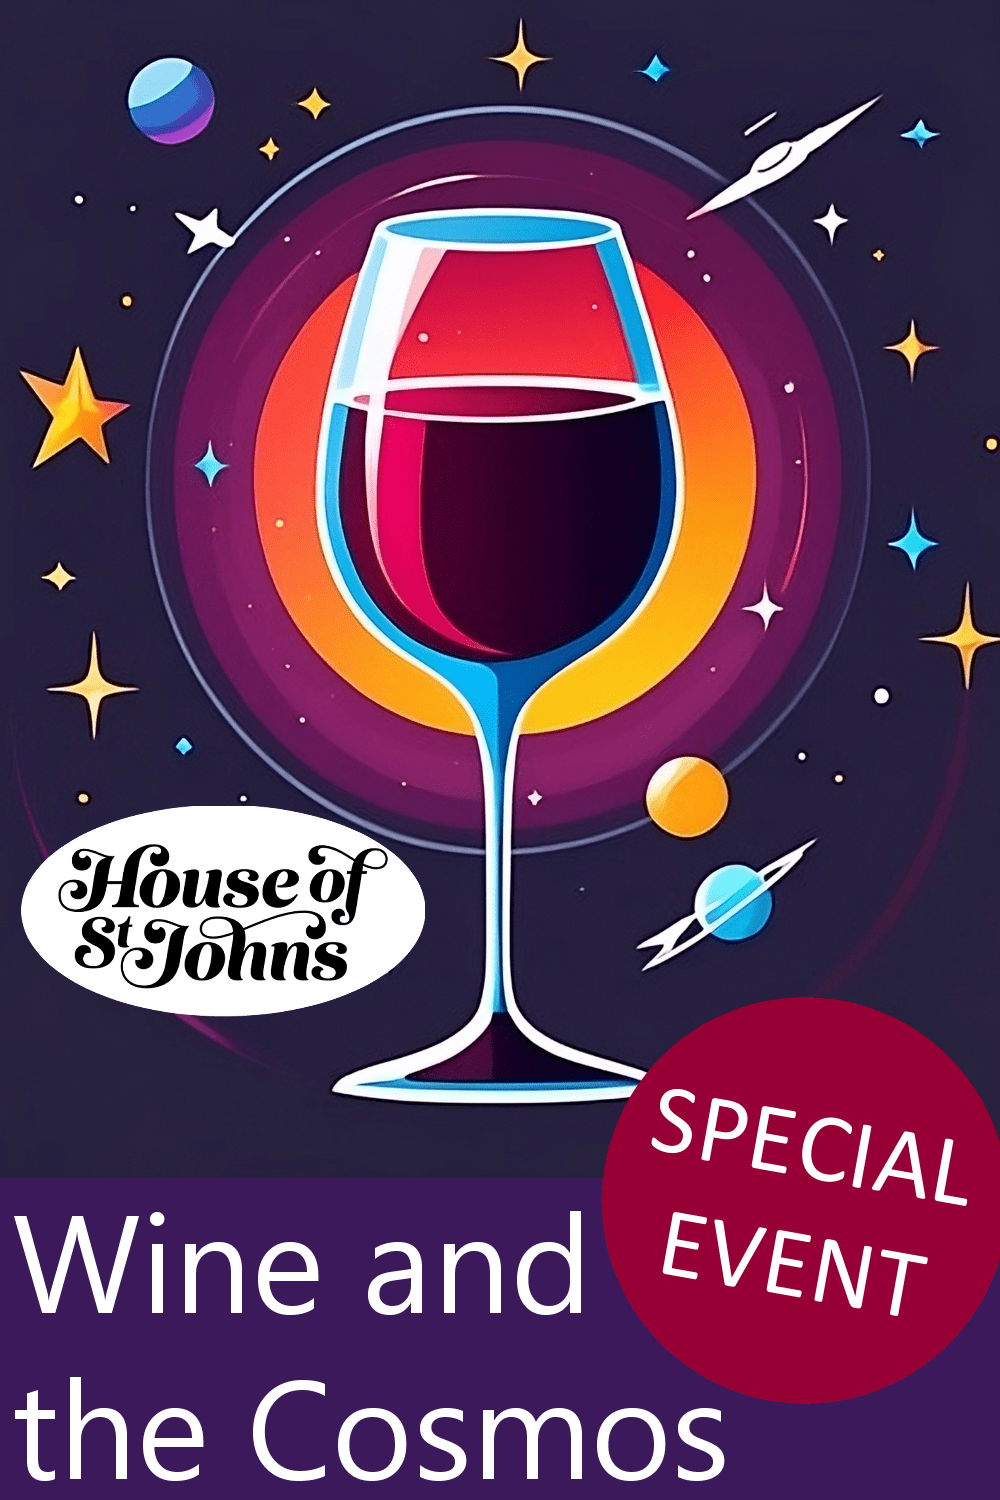 Novel Wines Event Wine and the Cosmos: A Galactic Tasting! - Hosted at the House of St Johns in Bath, Monday 15th April at 7pm